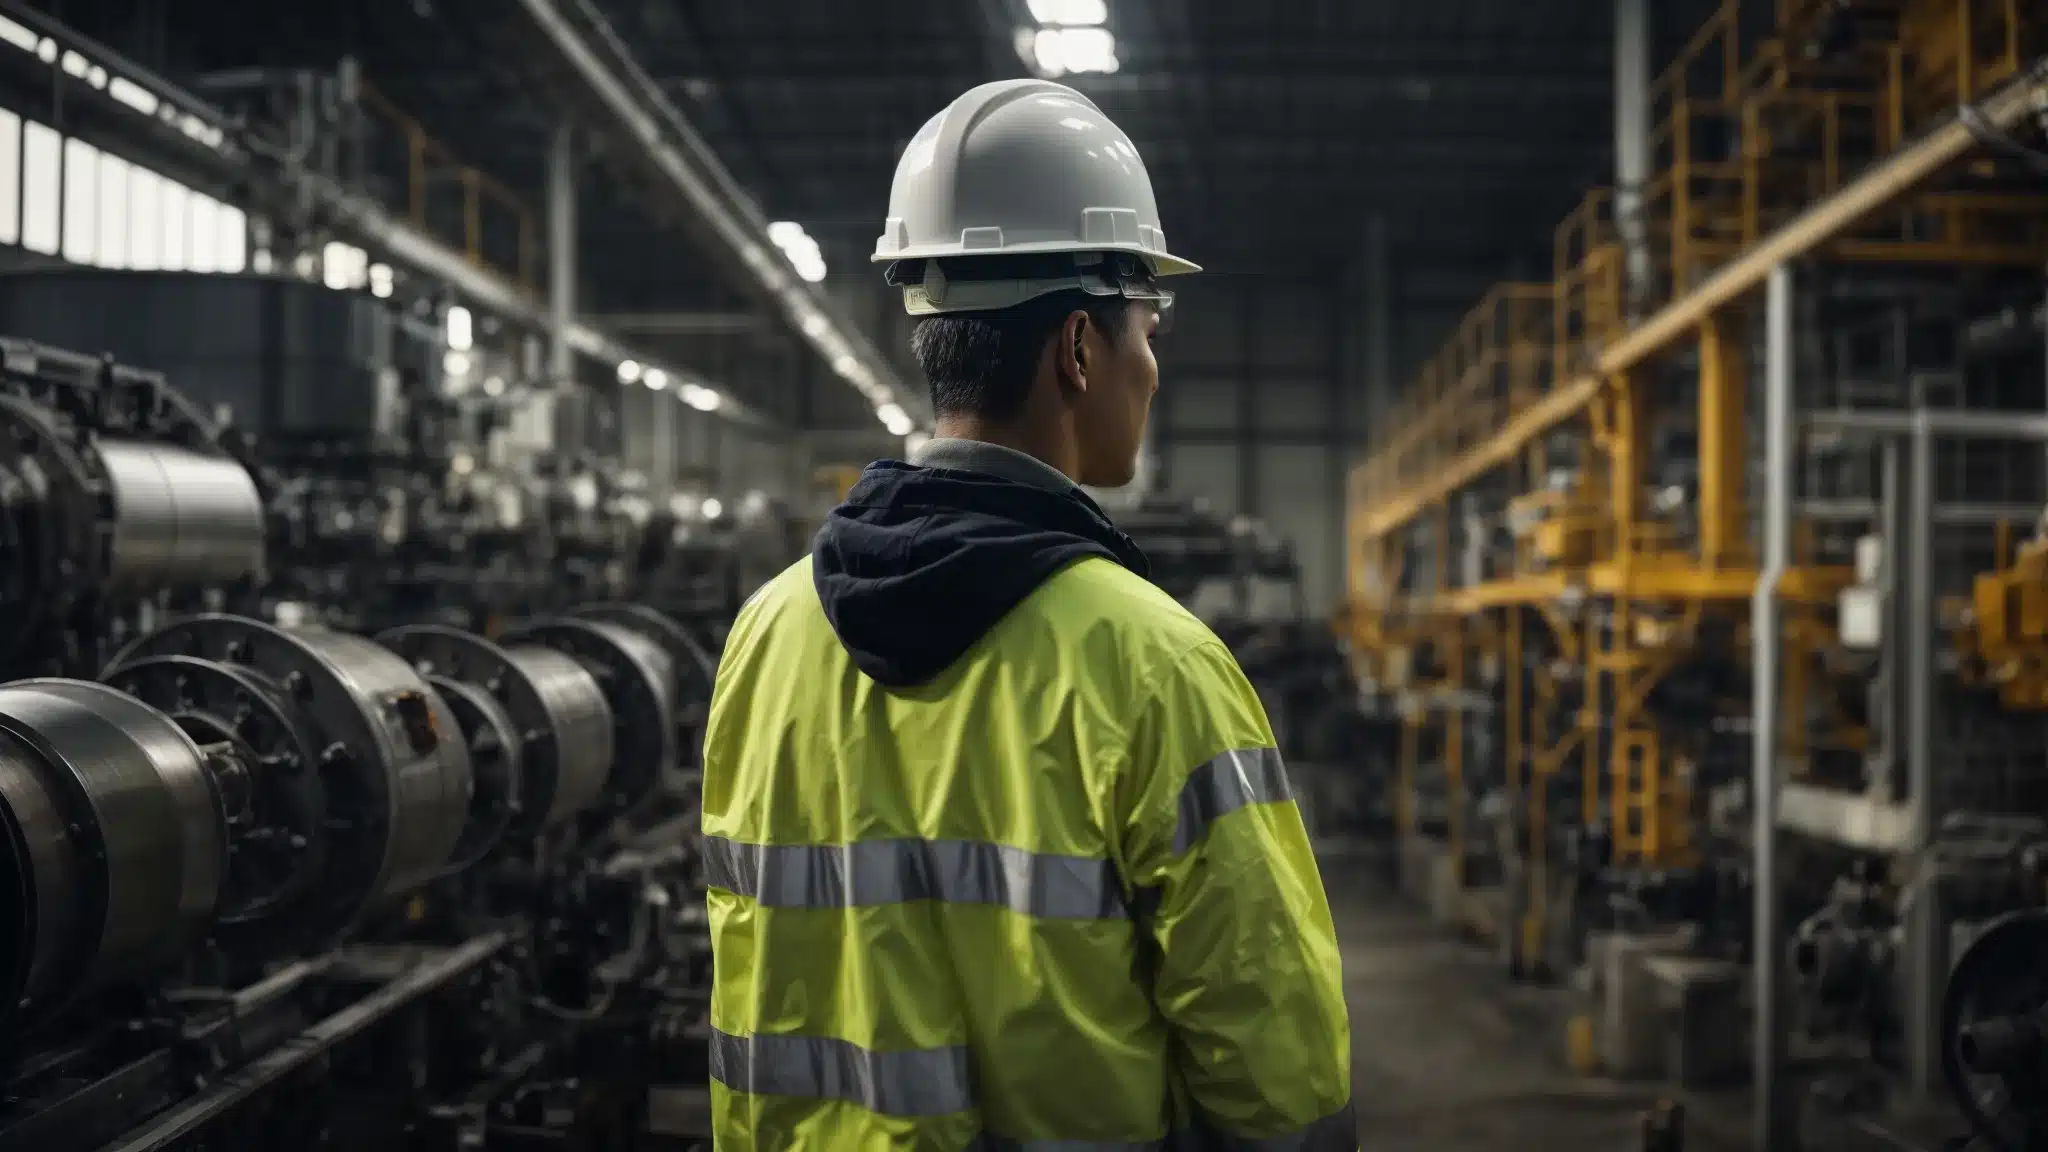 An Industrial Safety Inspector Wearing A Hard Hat And Reflective Vest Examines Machinery In A Well-Organized Factory Setting.